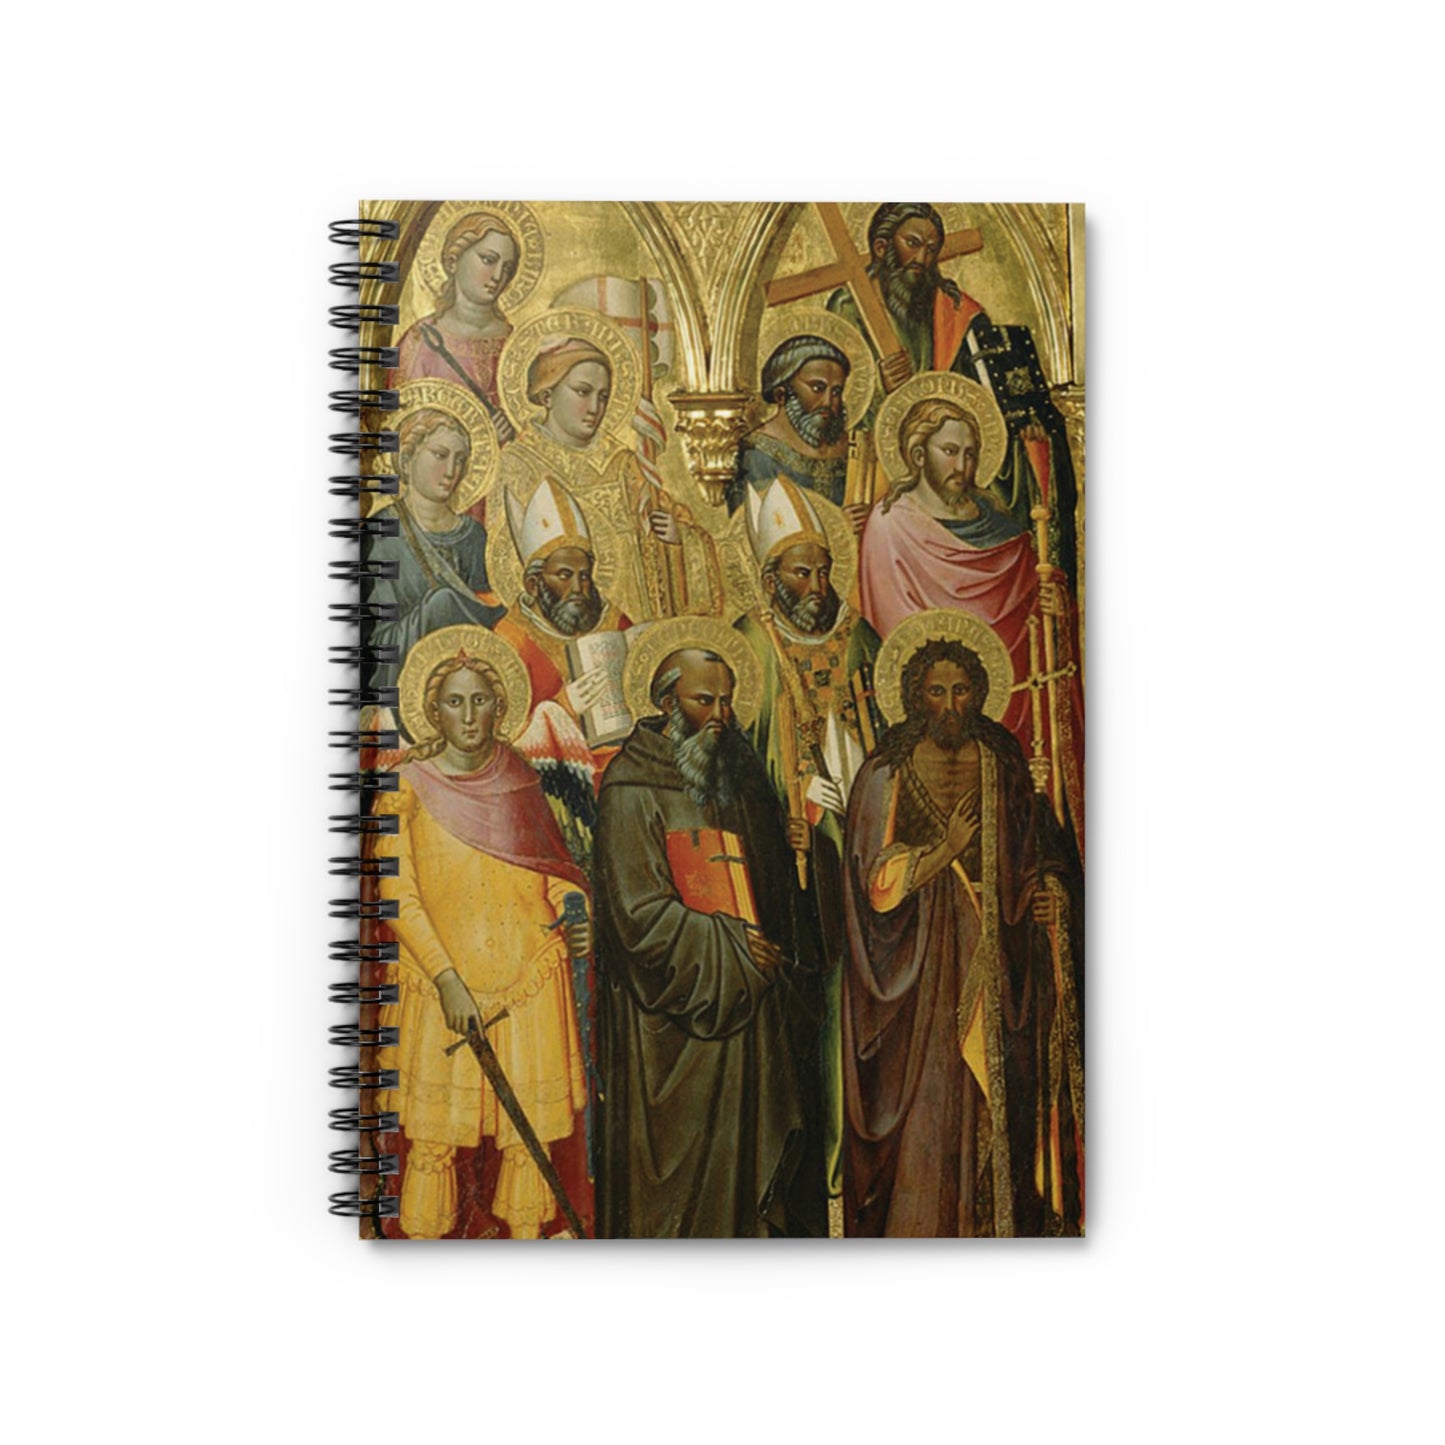 Spiral Notebook-Polyptych with Coronation of the Virgin and Saints'